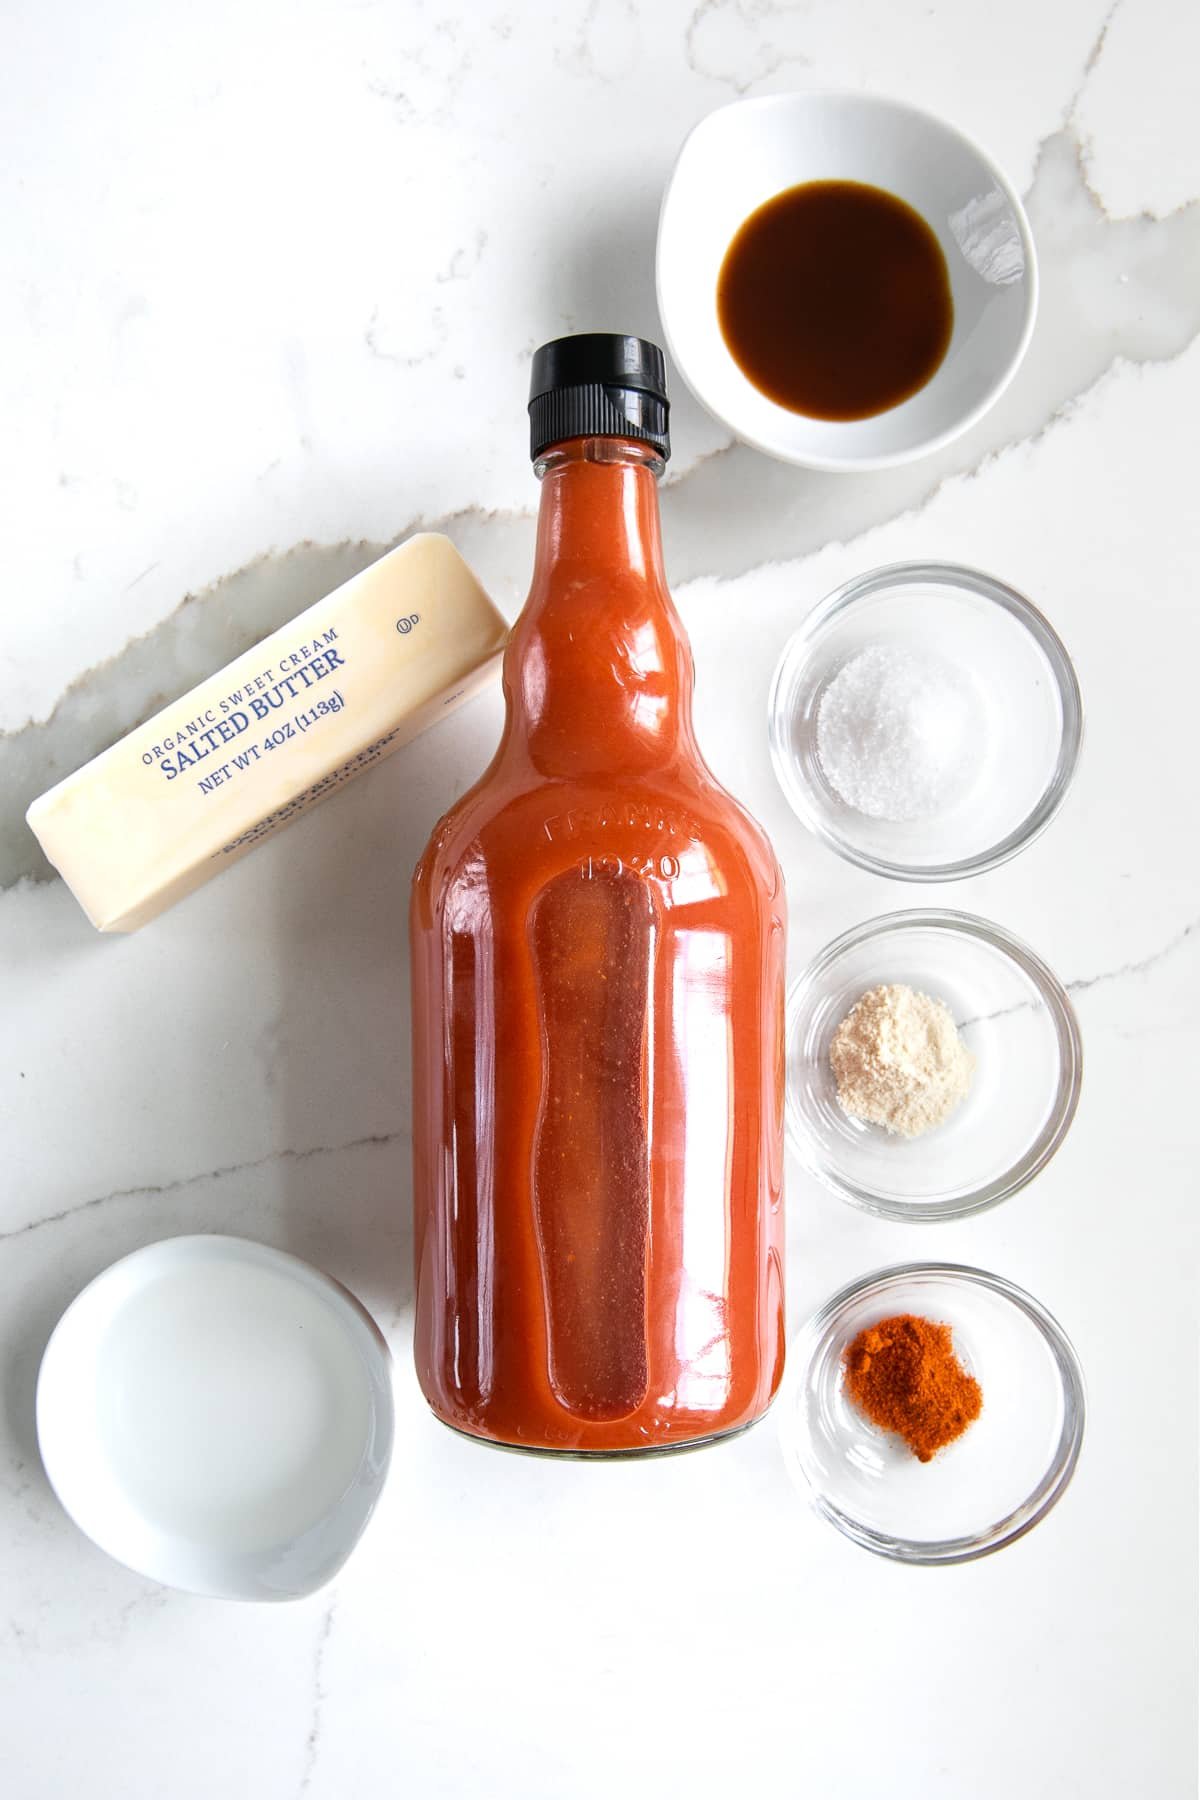 Overhead image of the ingredients needed to make homemade buffalo wing sauce: full bottle of hot sauce, white vinegar, stick of butter, Worcestershire sauce, salt, garlic powder, and cayenne powder.